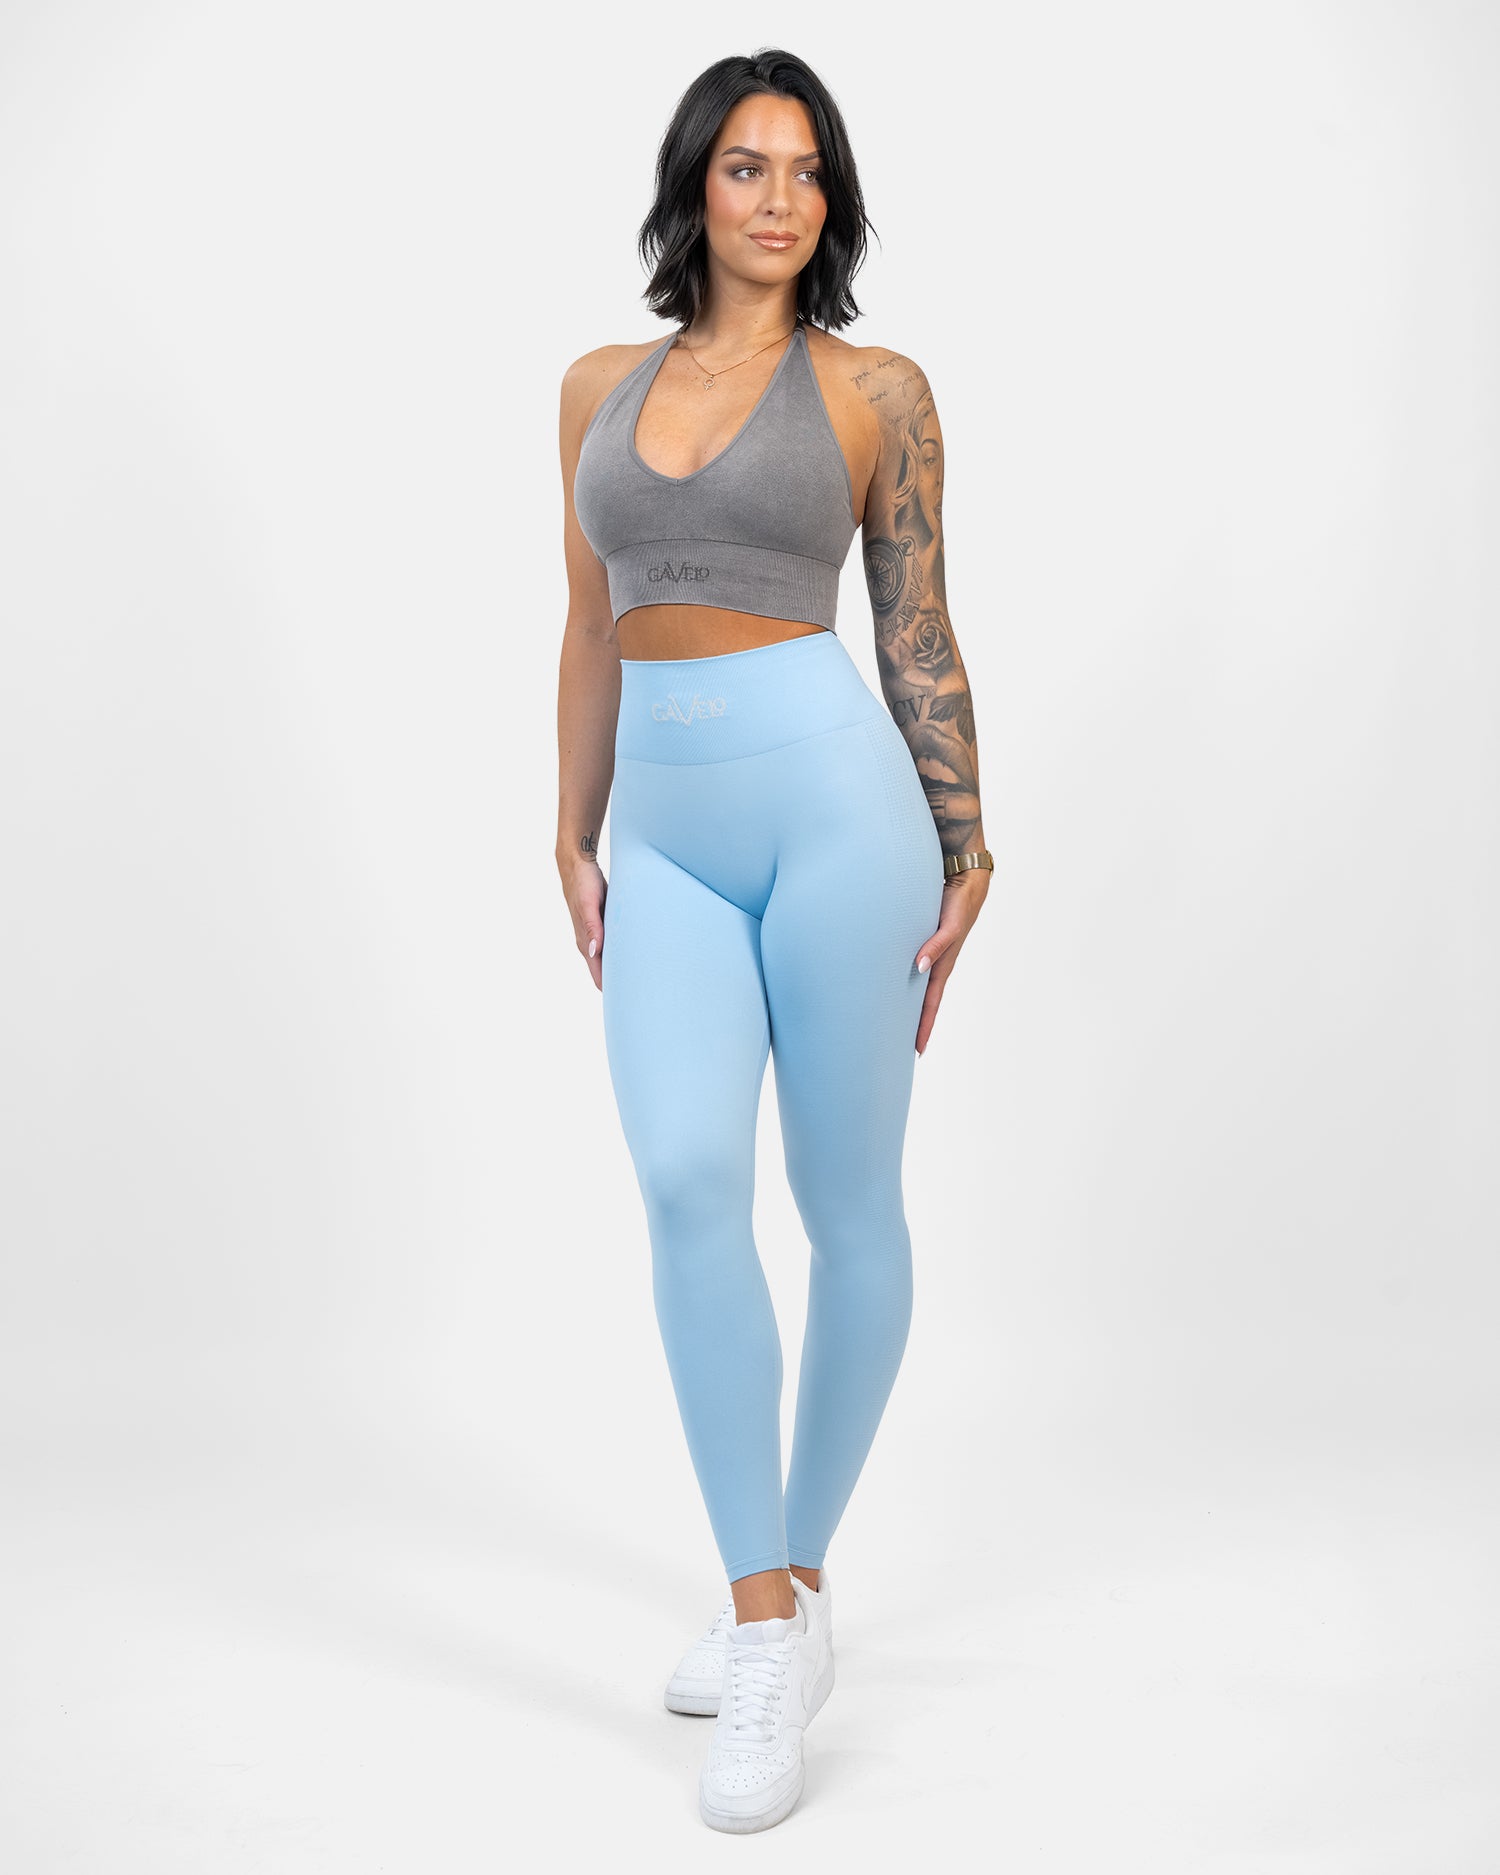 GAVELO Seamless Booster Sky Blue Tights